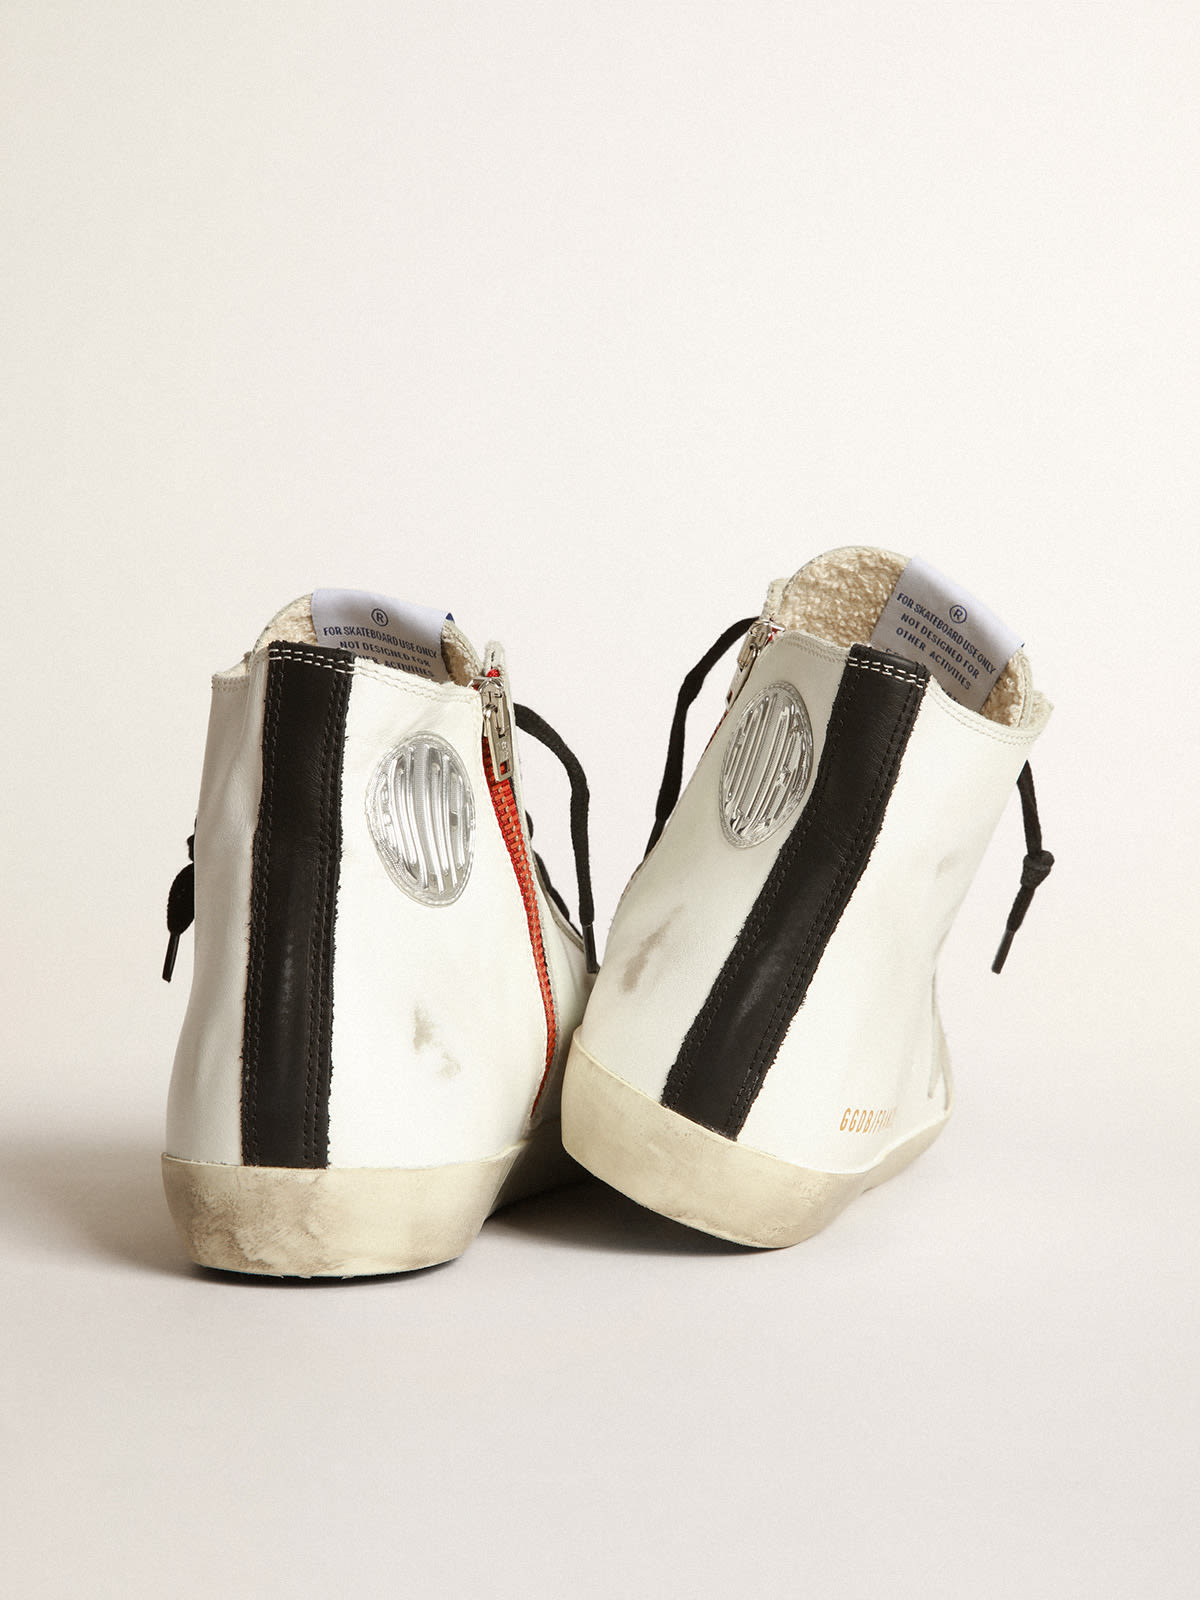 Golden Goose - Francy sneakers in leather with suede star and blue sole in 